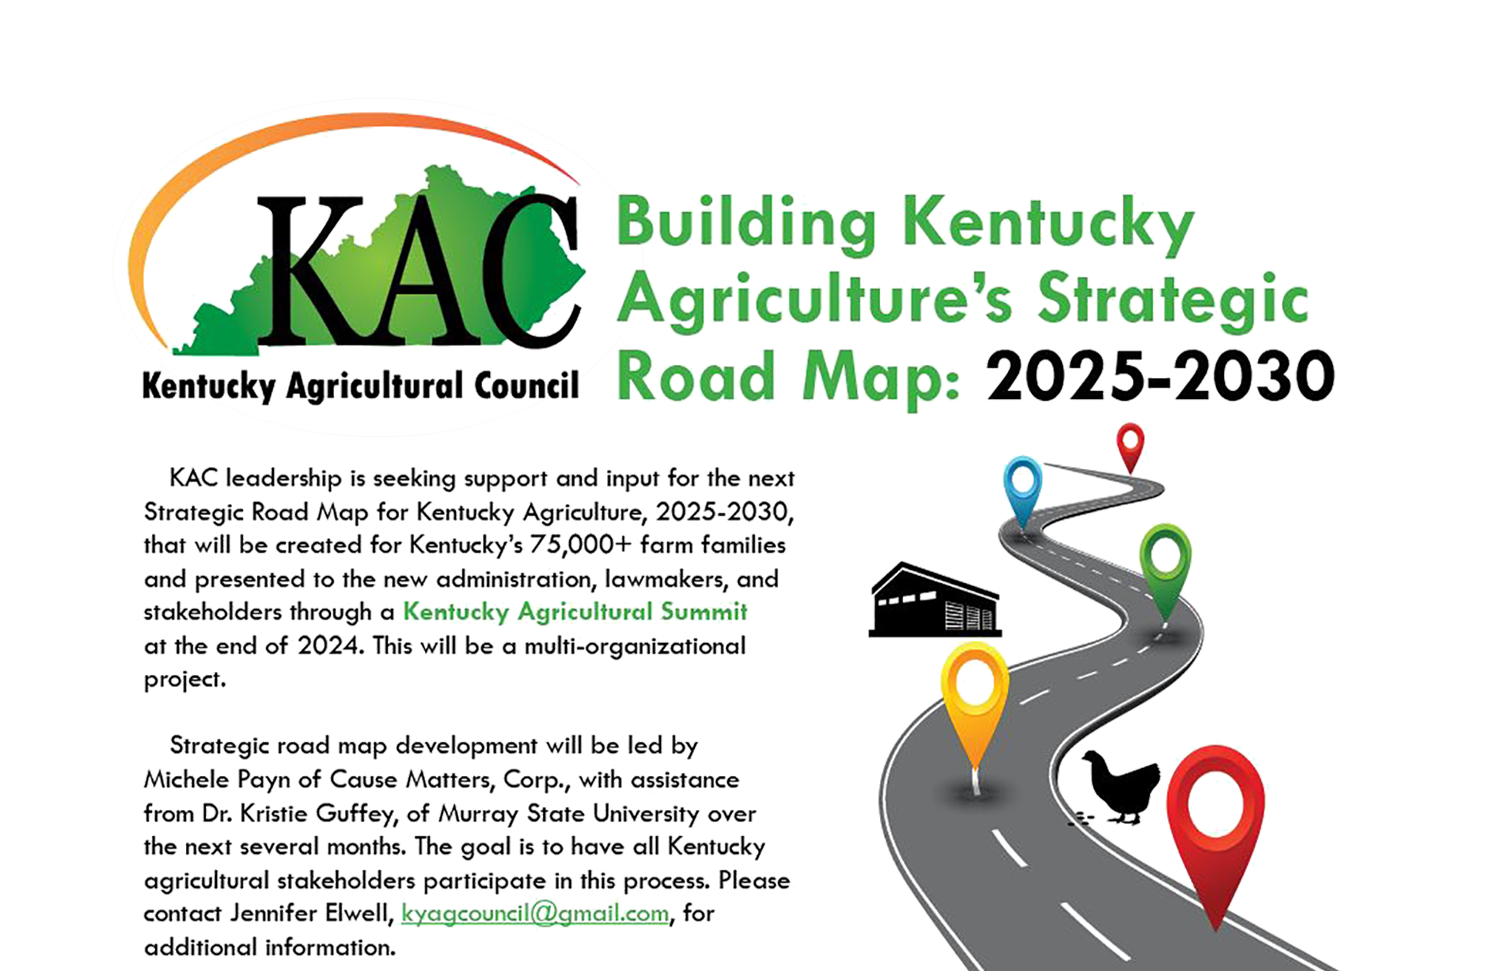 Strategic Plan for Kentucky Agriculture: 2025-2030